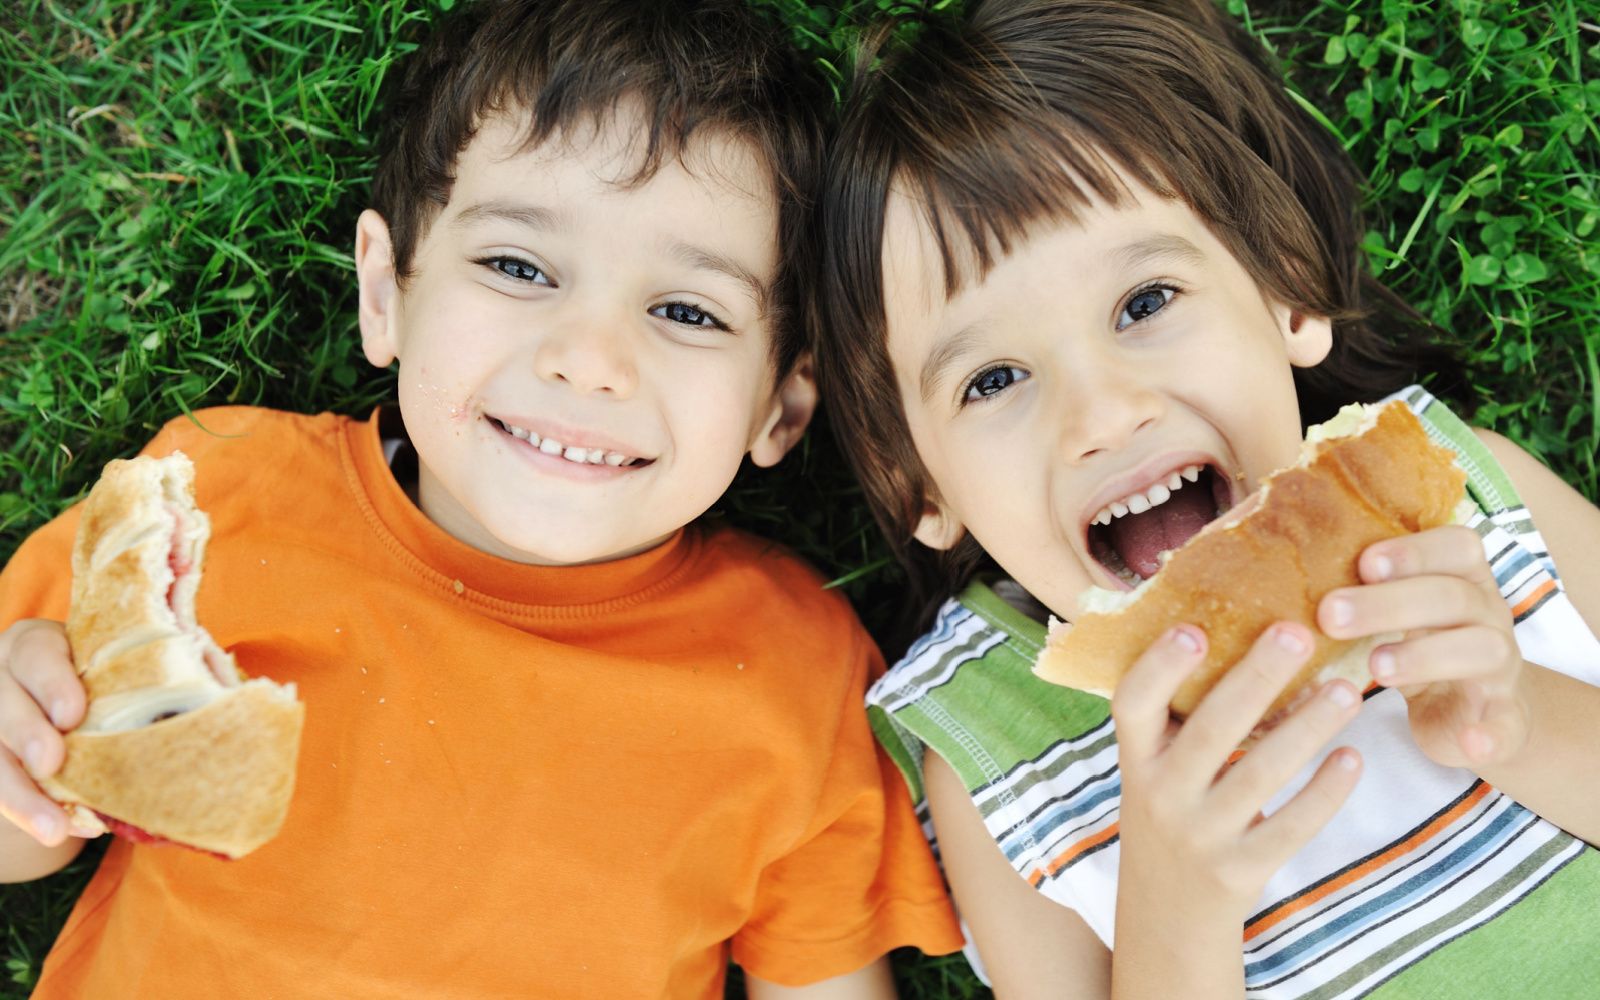 Two Children With Healthy Lunches